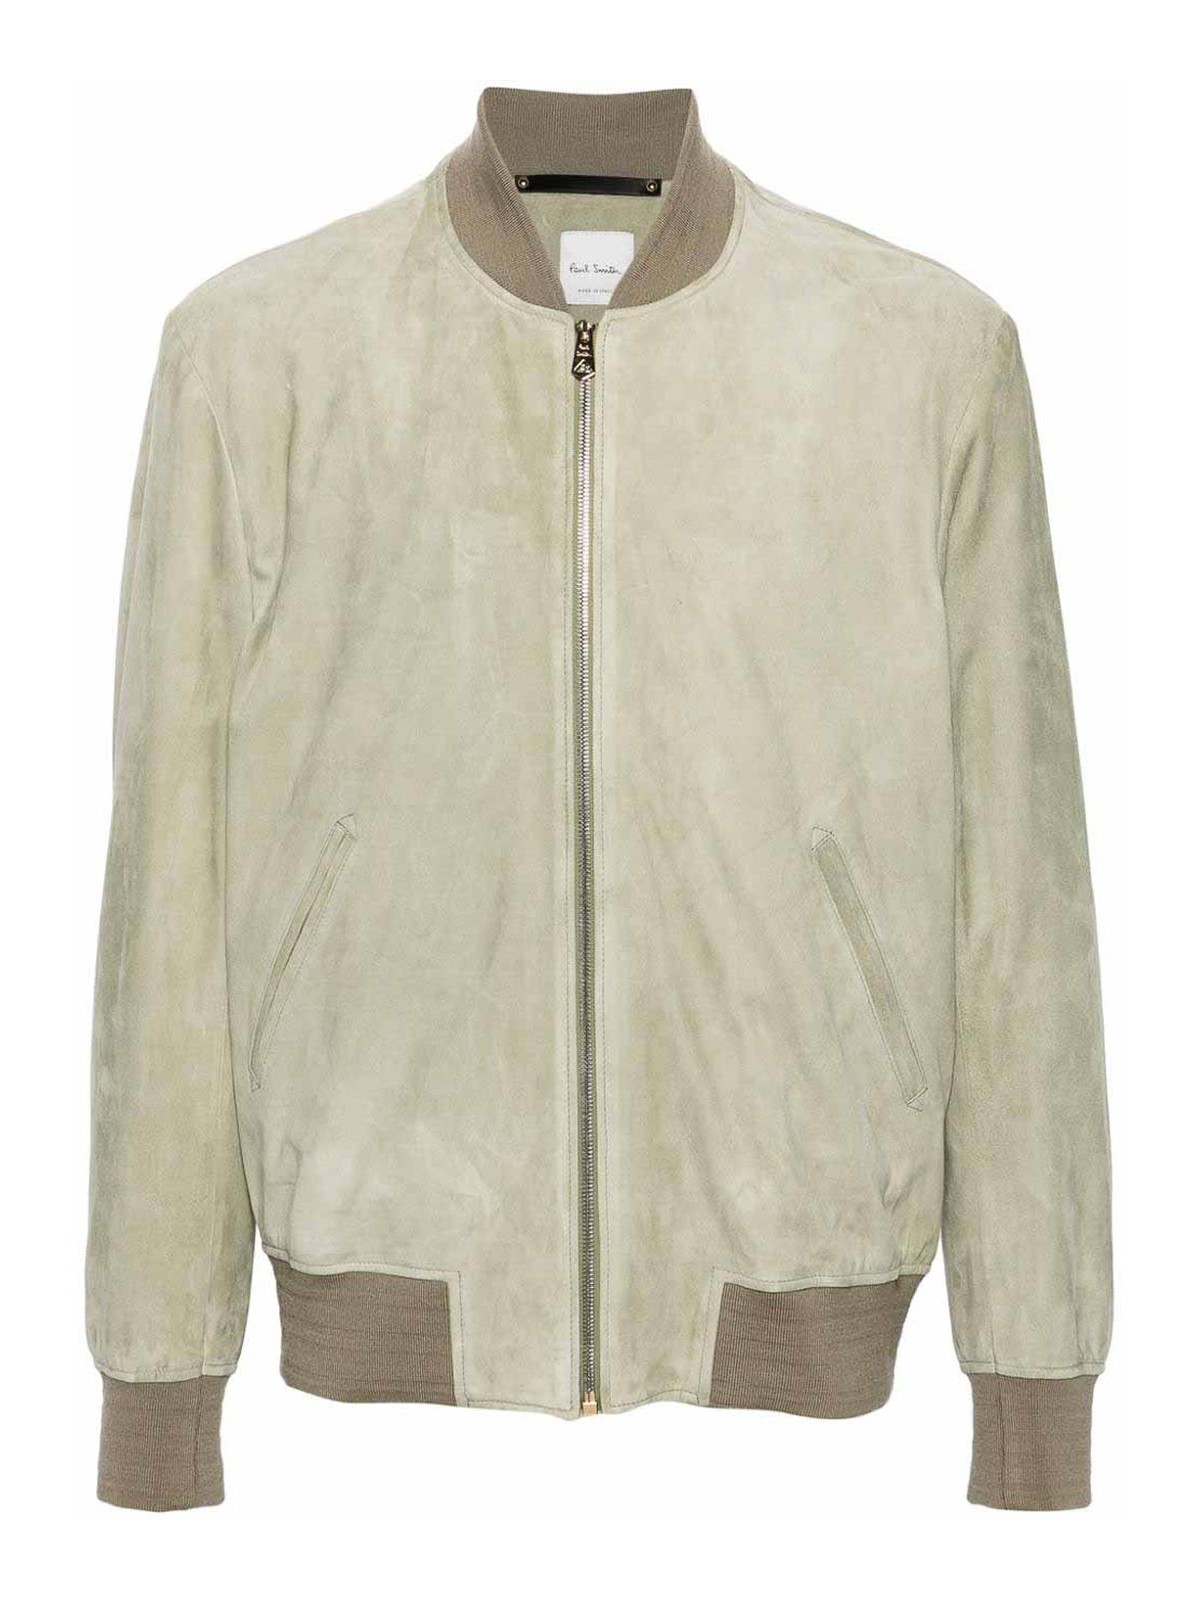 Paul Smith Suede Bomber Jacket In Neutral